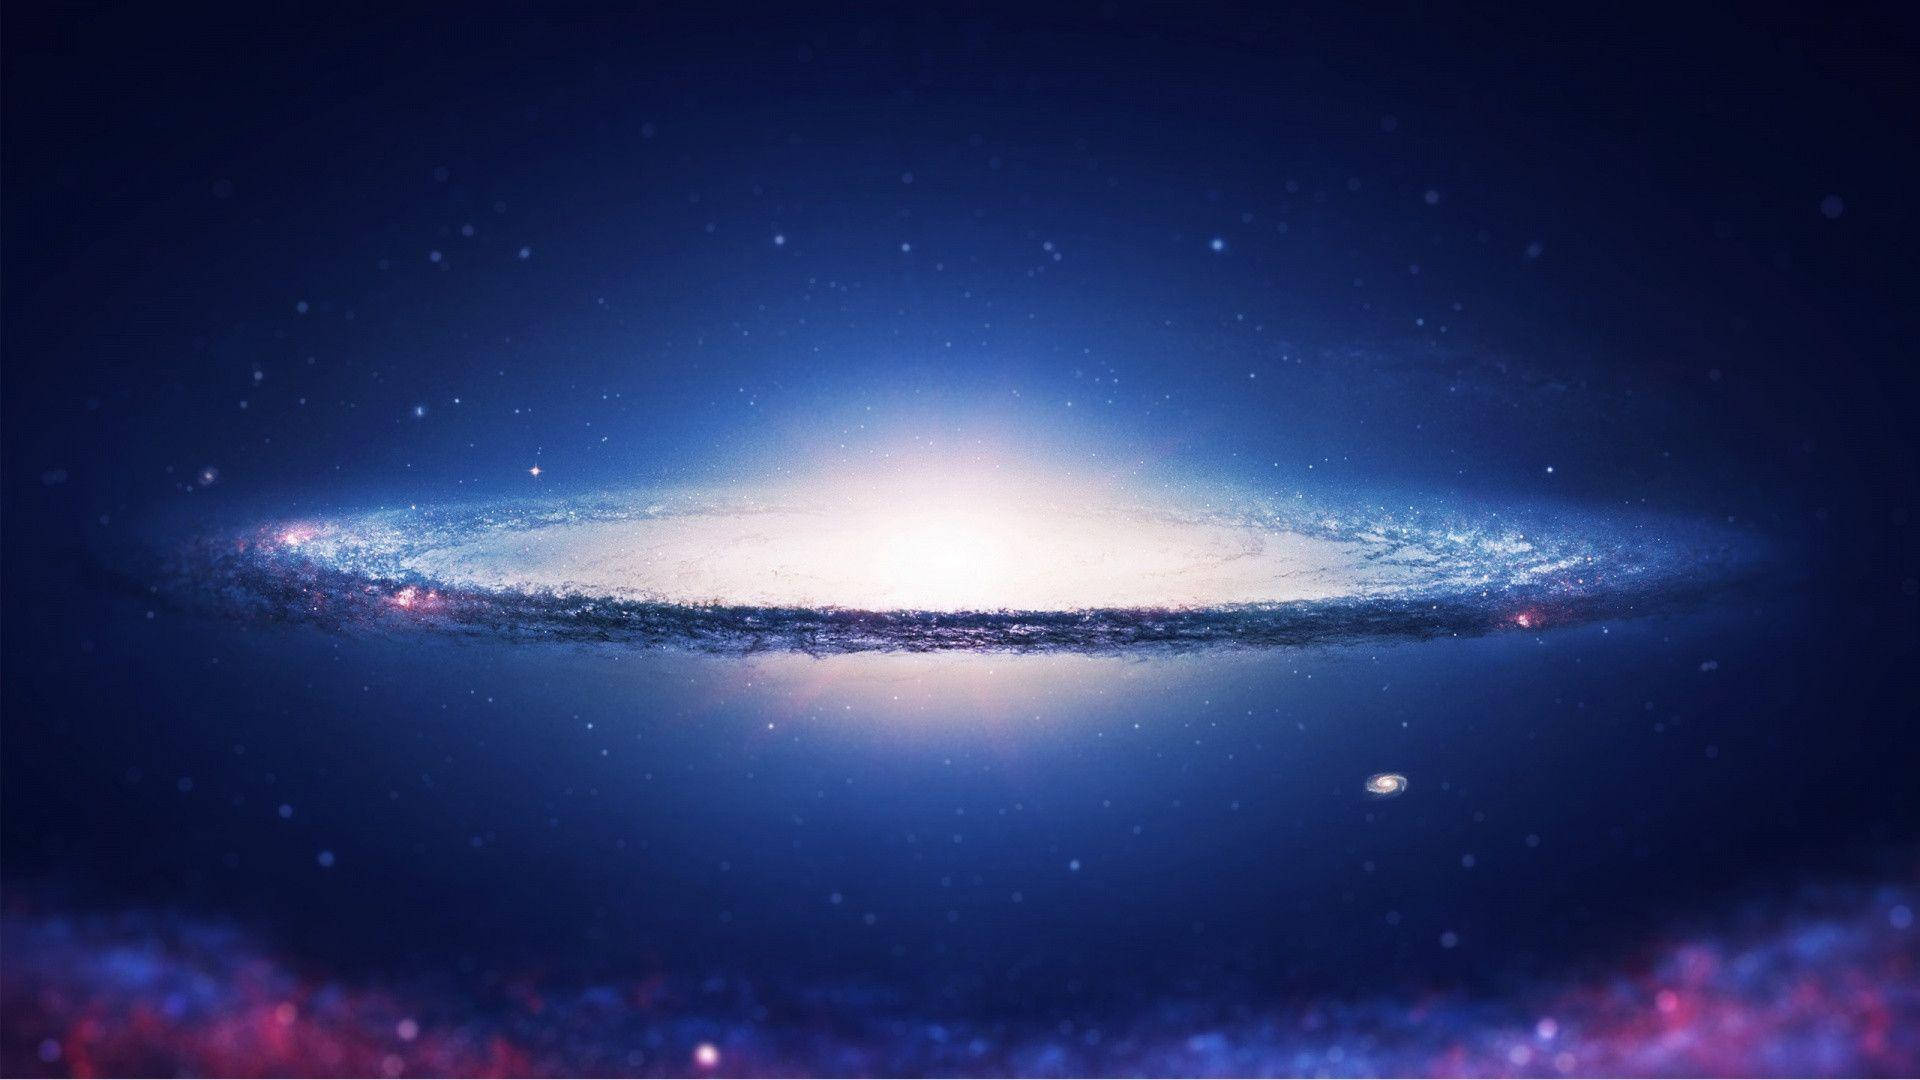 An incredible HD wallpaper of bright light surrounded by ring of heavenly bodies in the galaxy illuminating the surrounding.